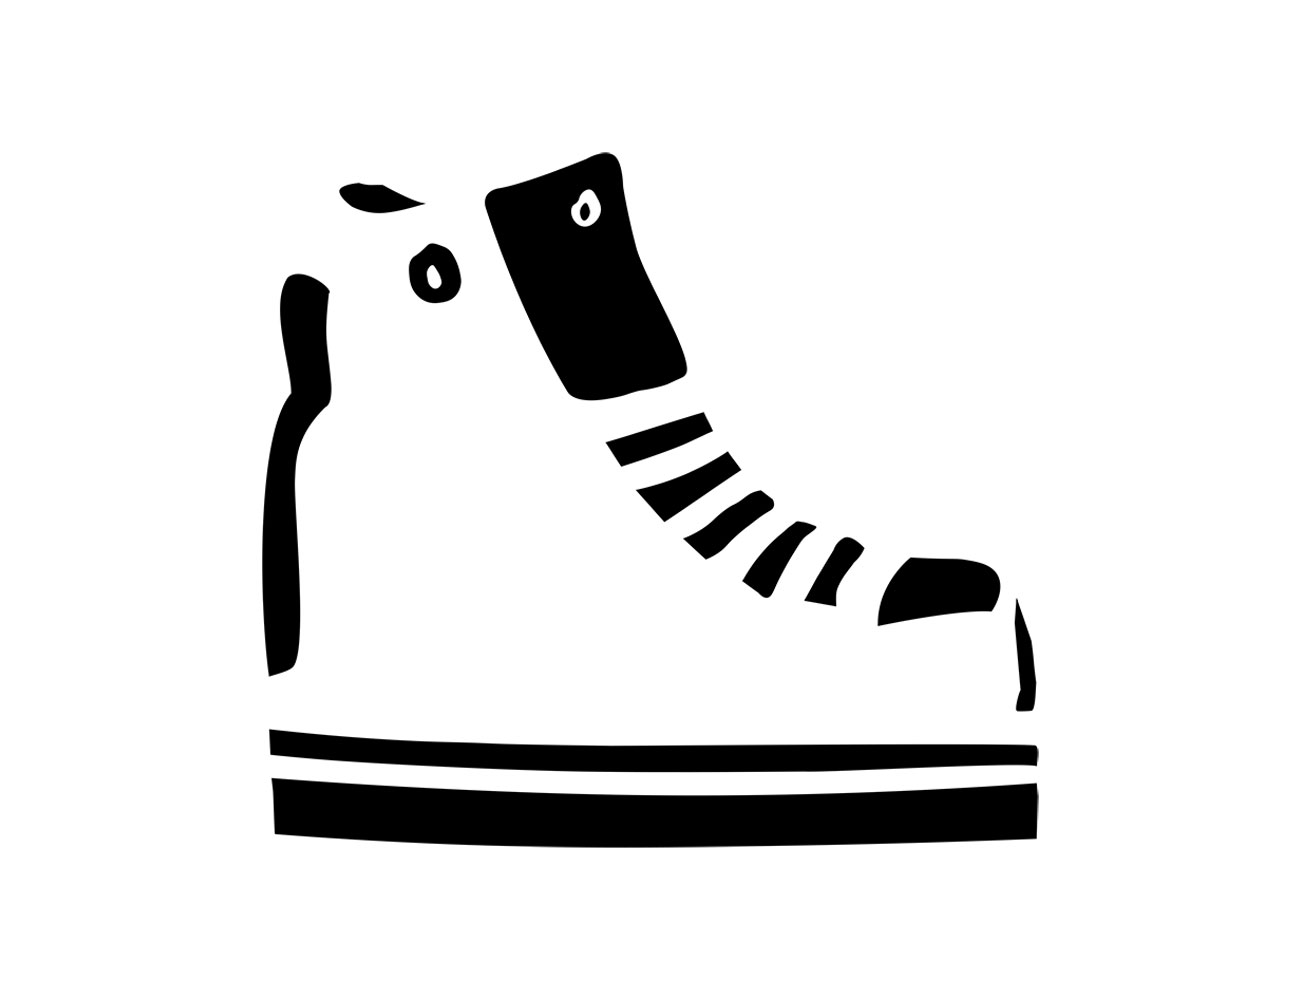 Shoe drawing seven: a line drawing with more uniform shapes.